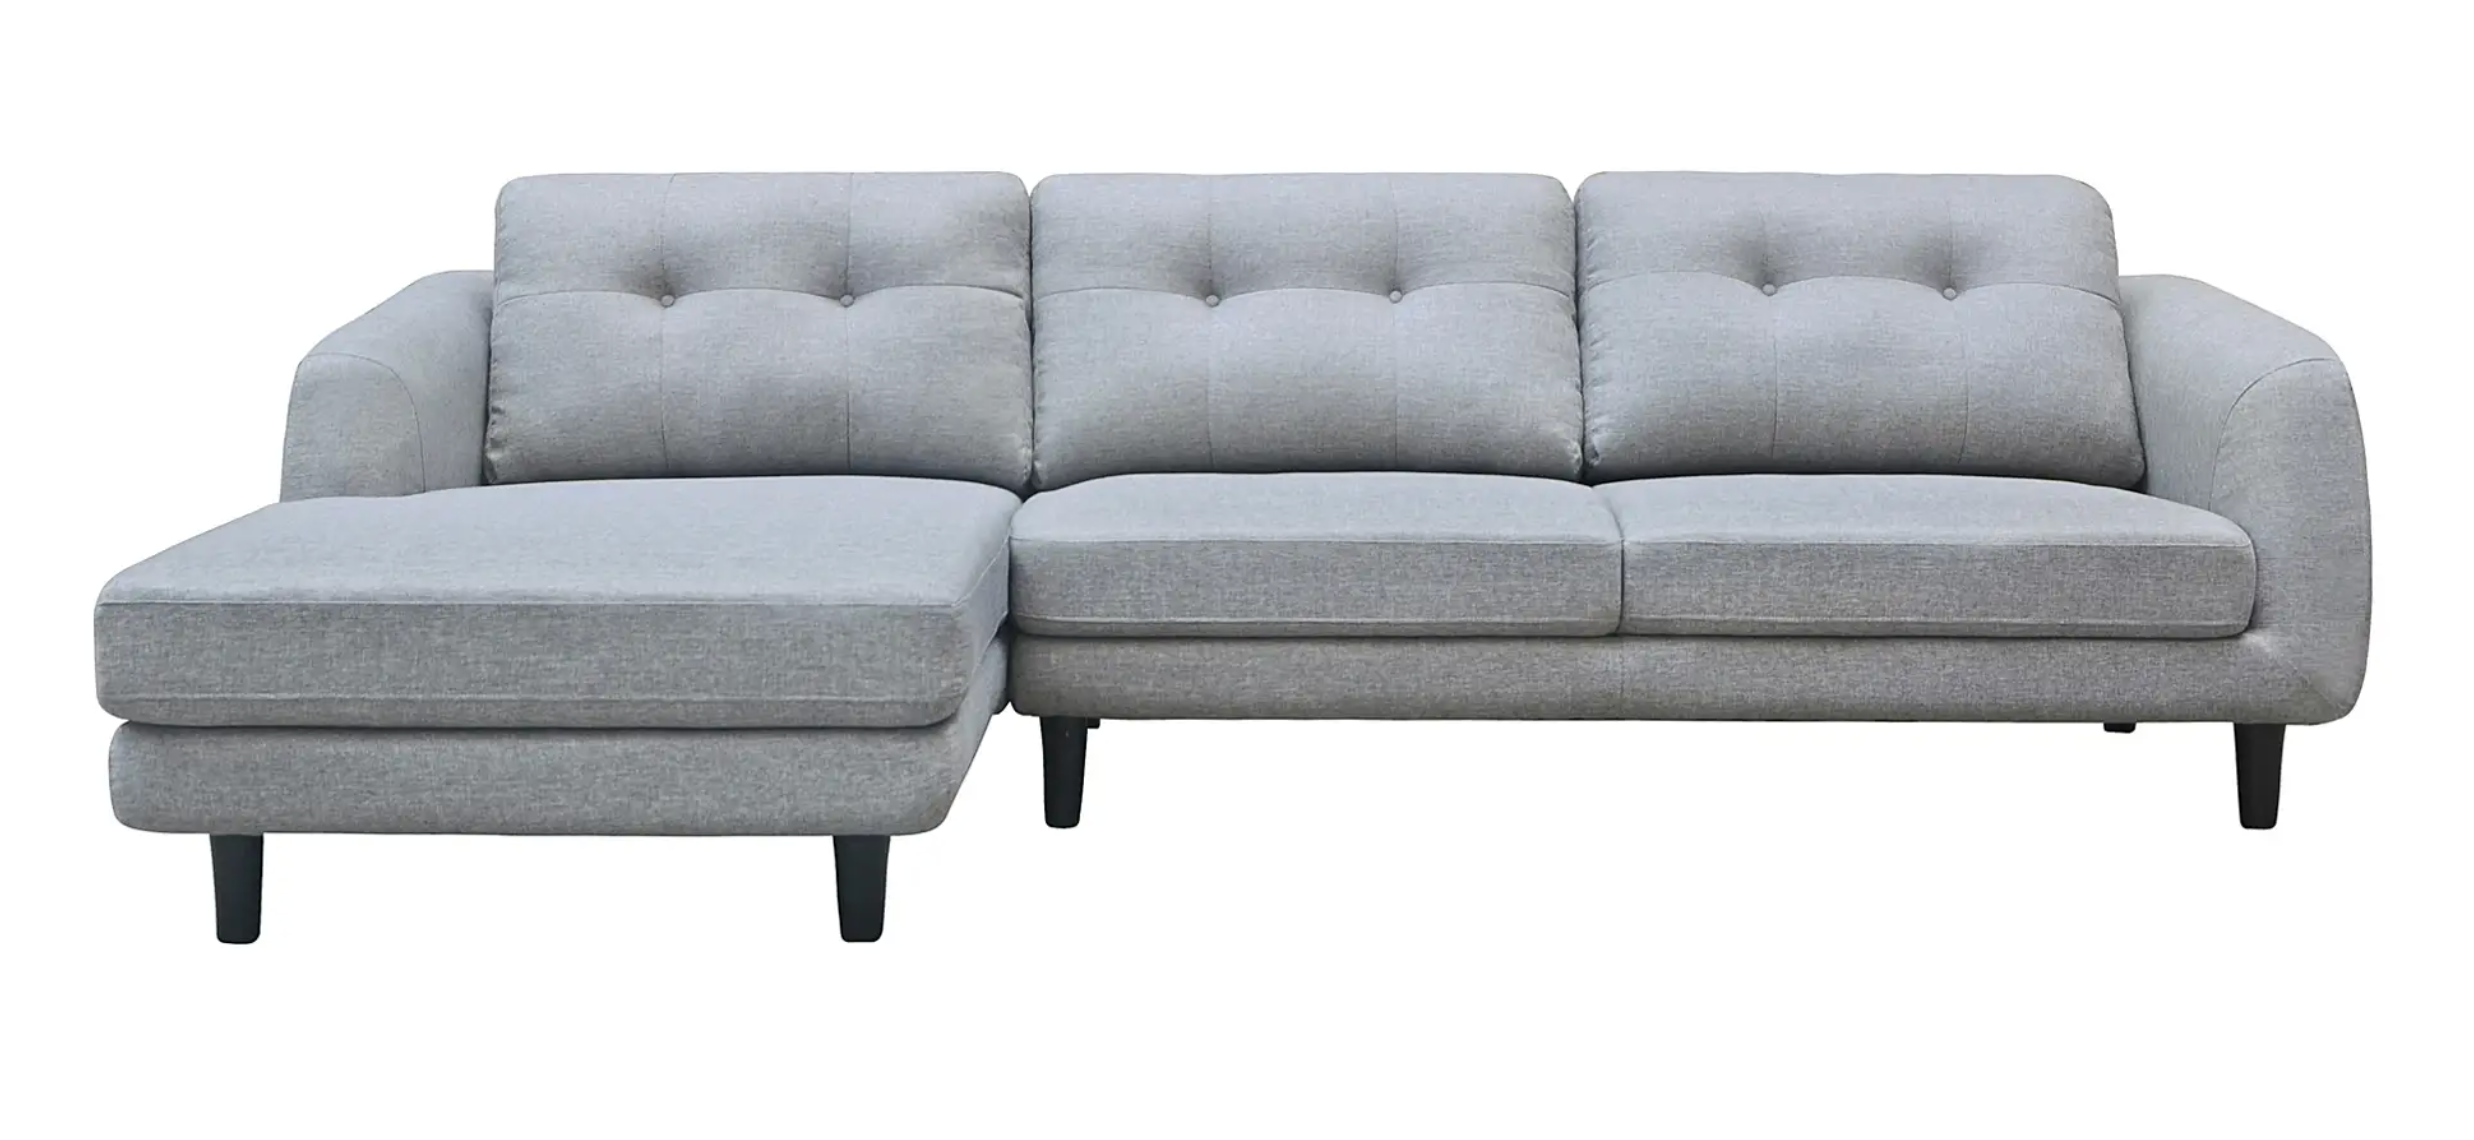 Belagio Sofa Bed With Left-Facing Chaise